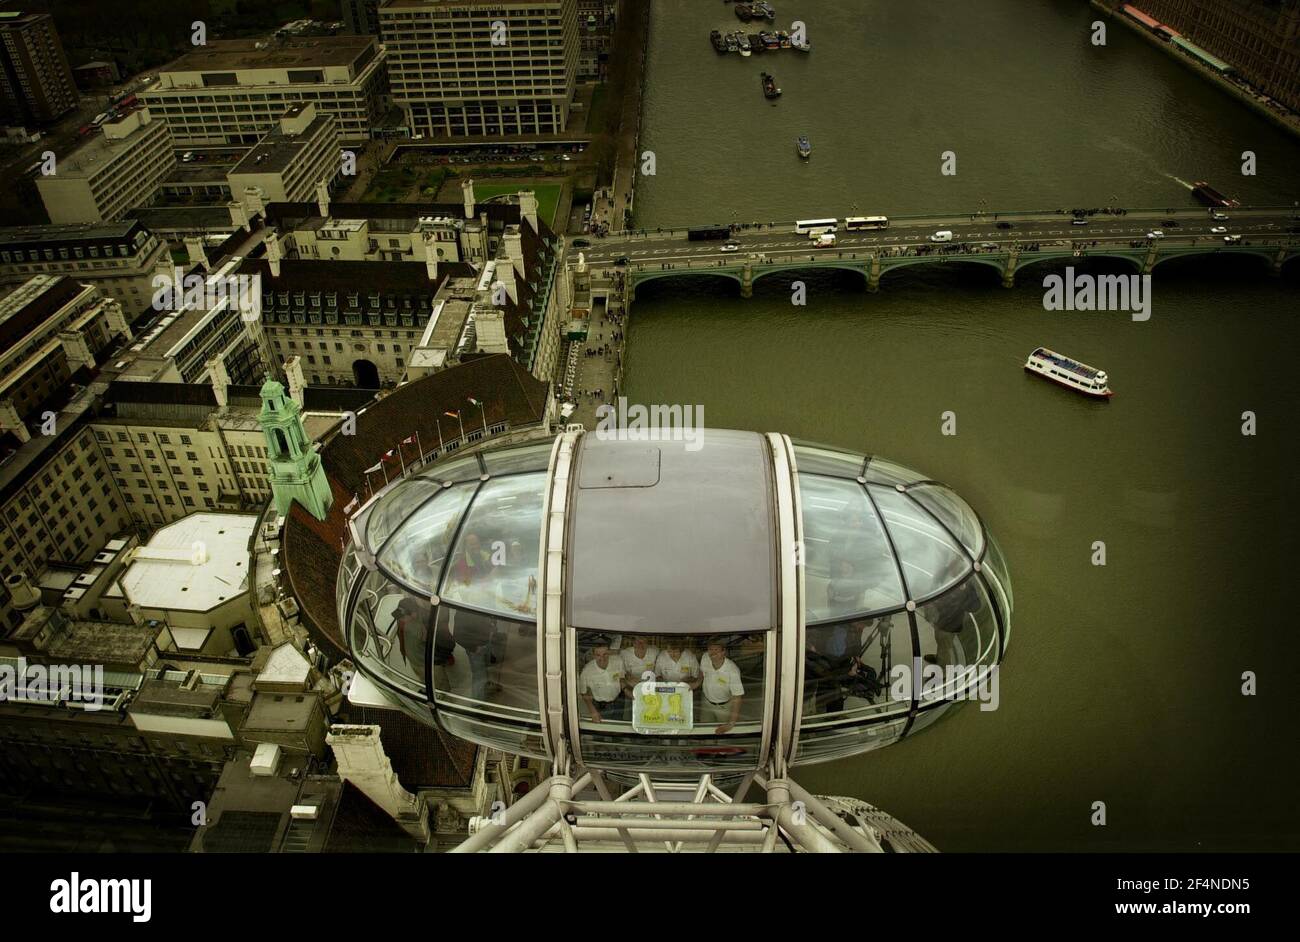 FORMER WINNERS OF THE LONDON MARATHON, APRIL 2001WHICH CELEBRATES ITS 21st YEAR ON SUNDAY, WERE TREATED FOR A GO ON THE LONDON EYE AS A GOODWILL GESTURE. THE PHOTOGRAPHER MANAGED TO BLAG A GO ON IT HIMSELF. Stock Photo